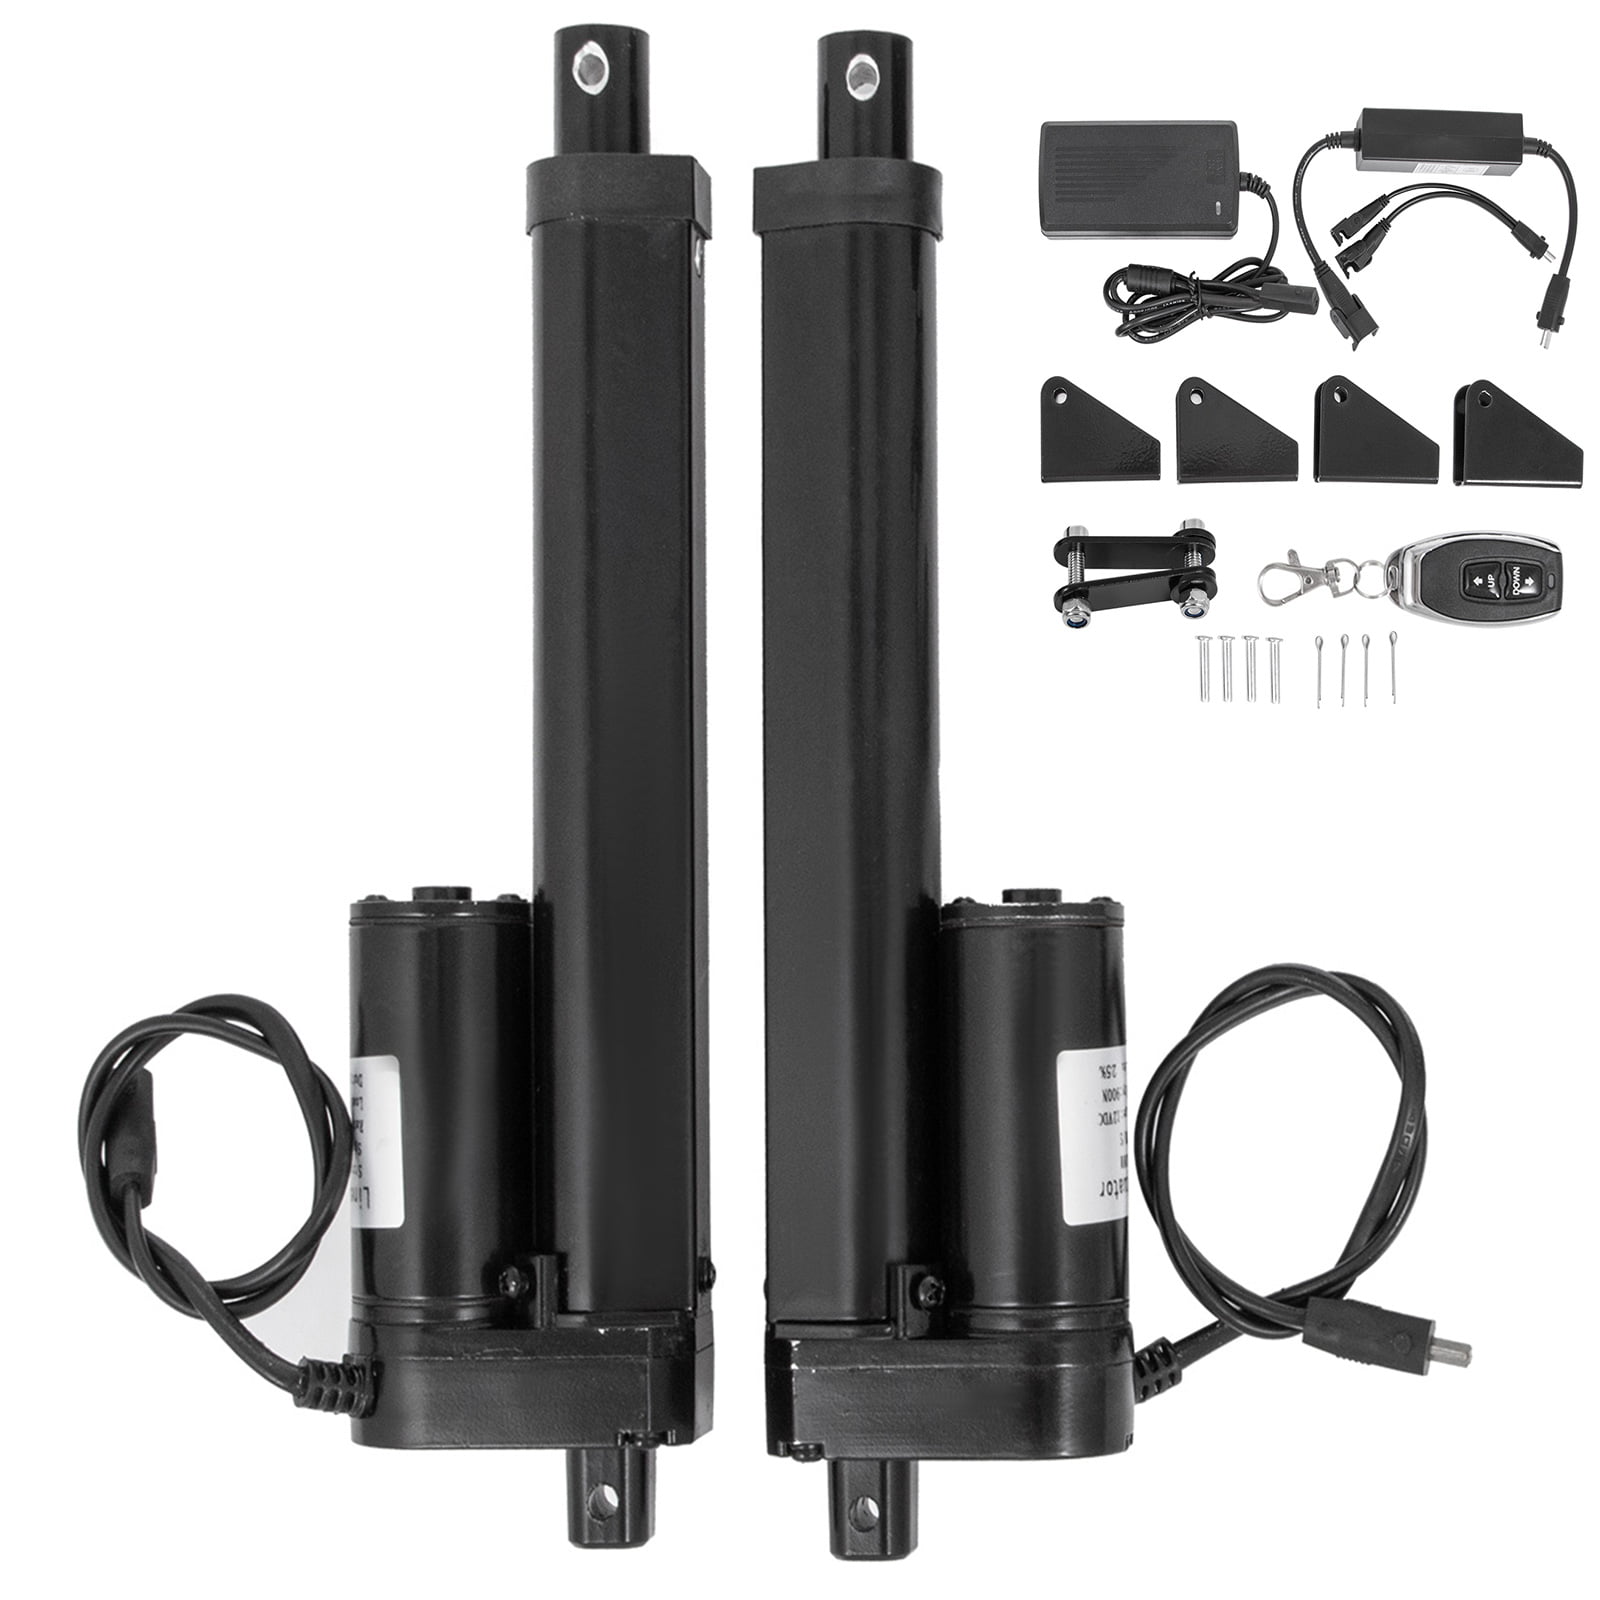 2-18" Electric Linear Actuator Motor 900N 225lbs Heavy Duty For Auto Lift DC12V 